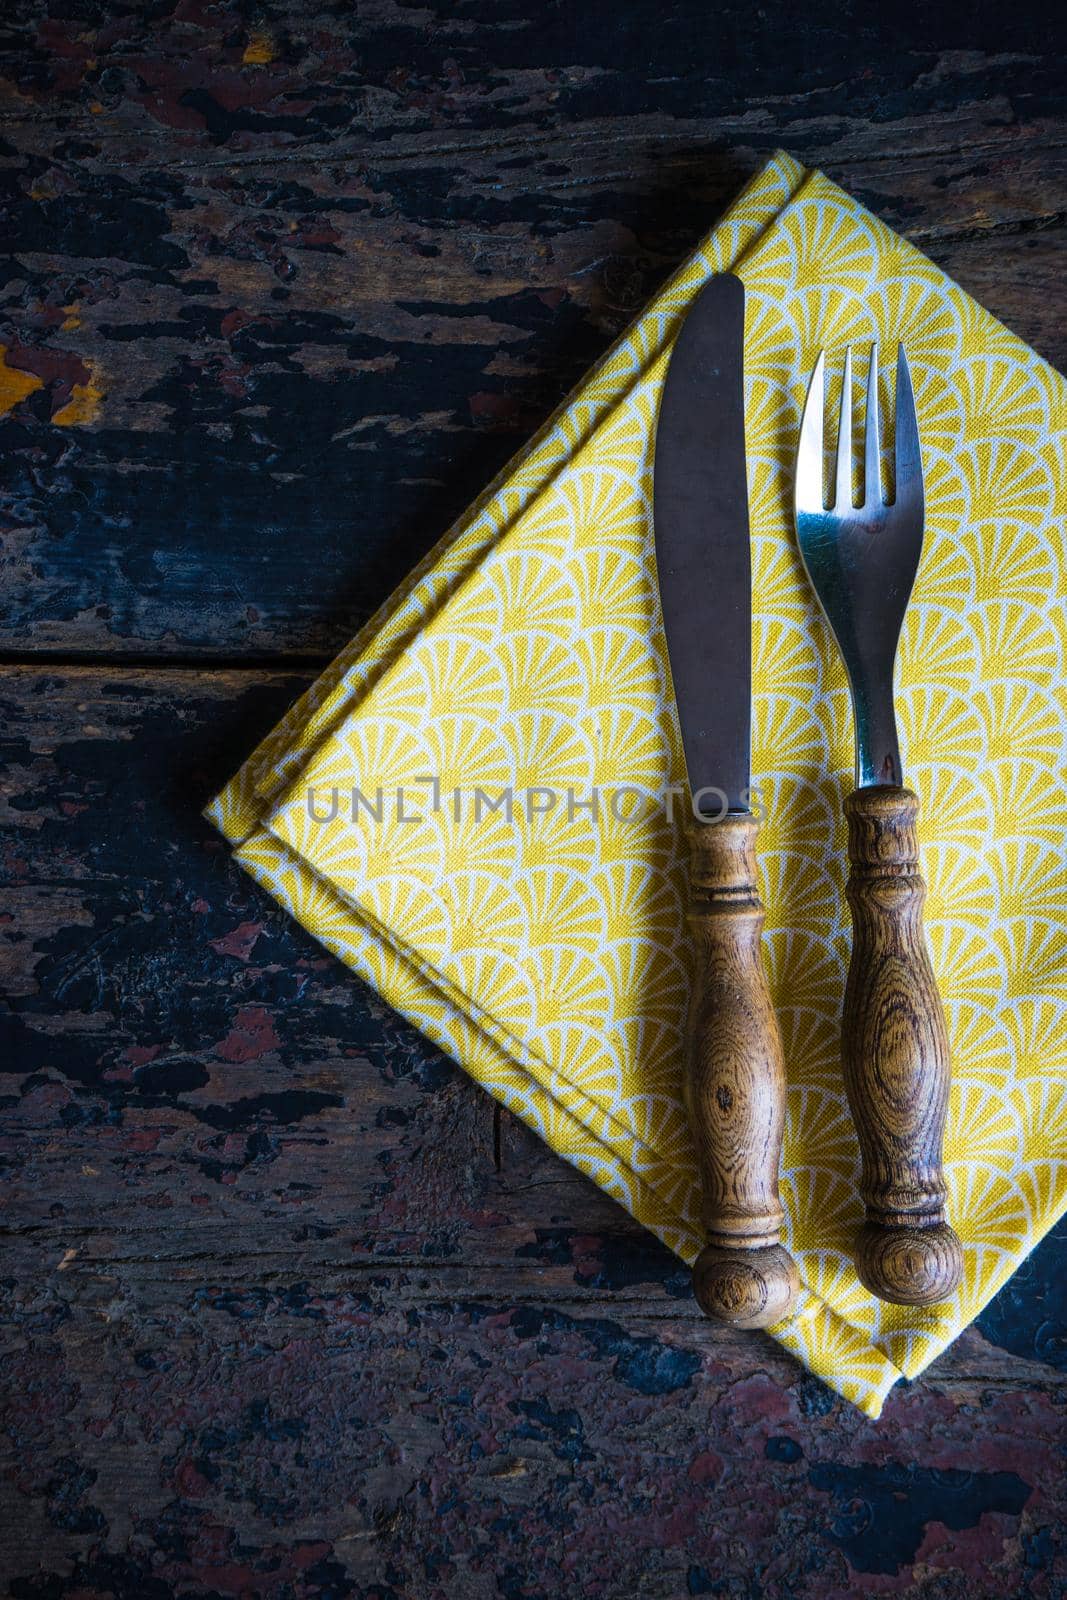 Rustic table setting with bright napkin nd silverware on dark wooden table